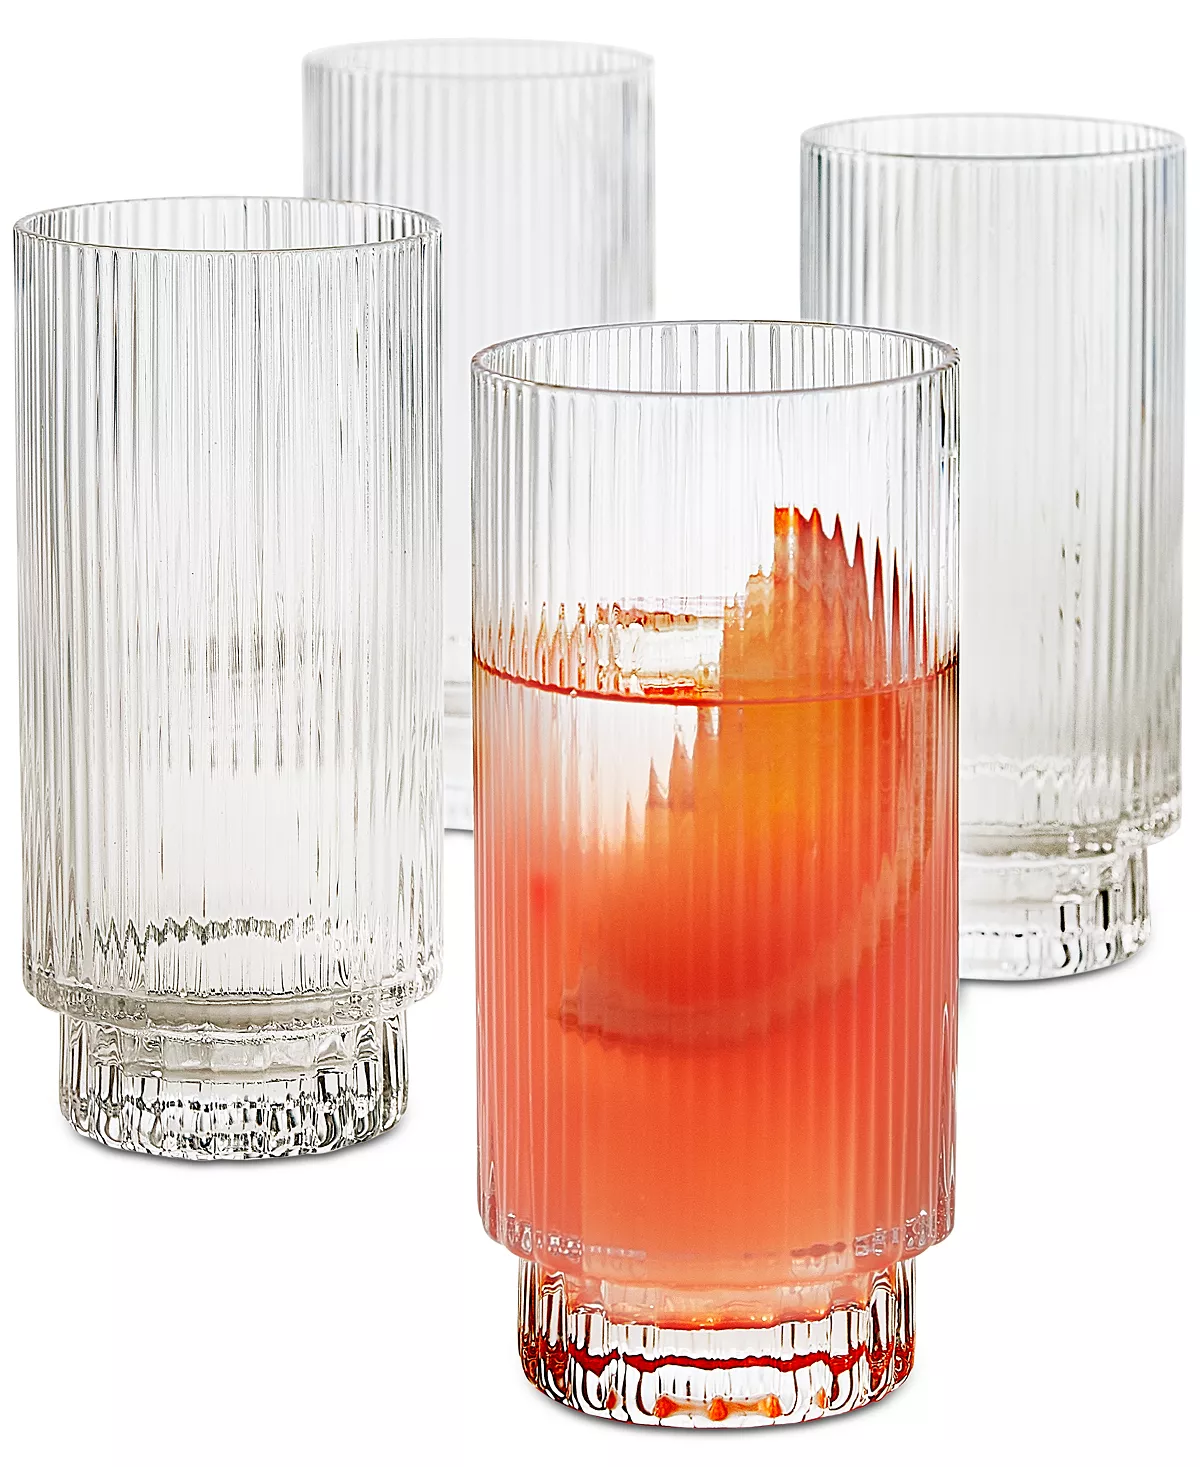 Four highball glasses, one of which is holding a grapefruit cocktail